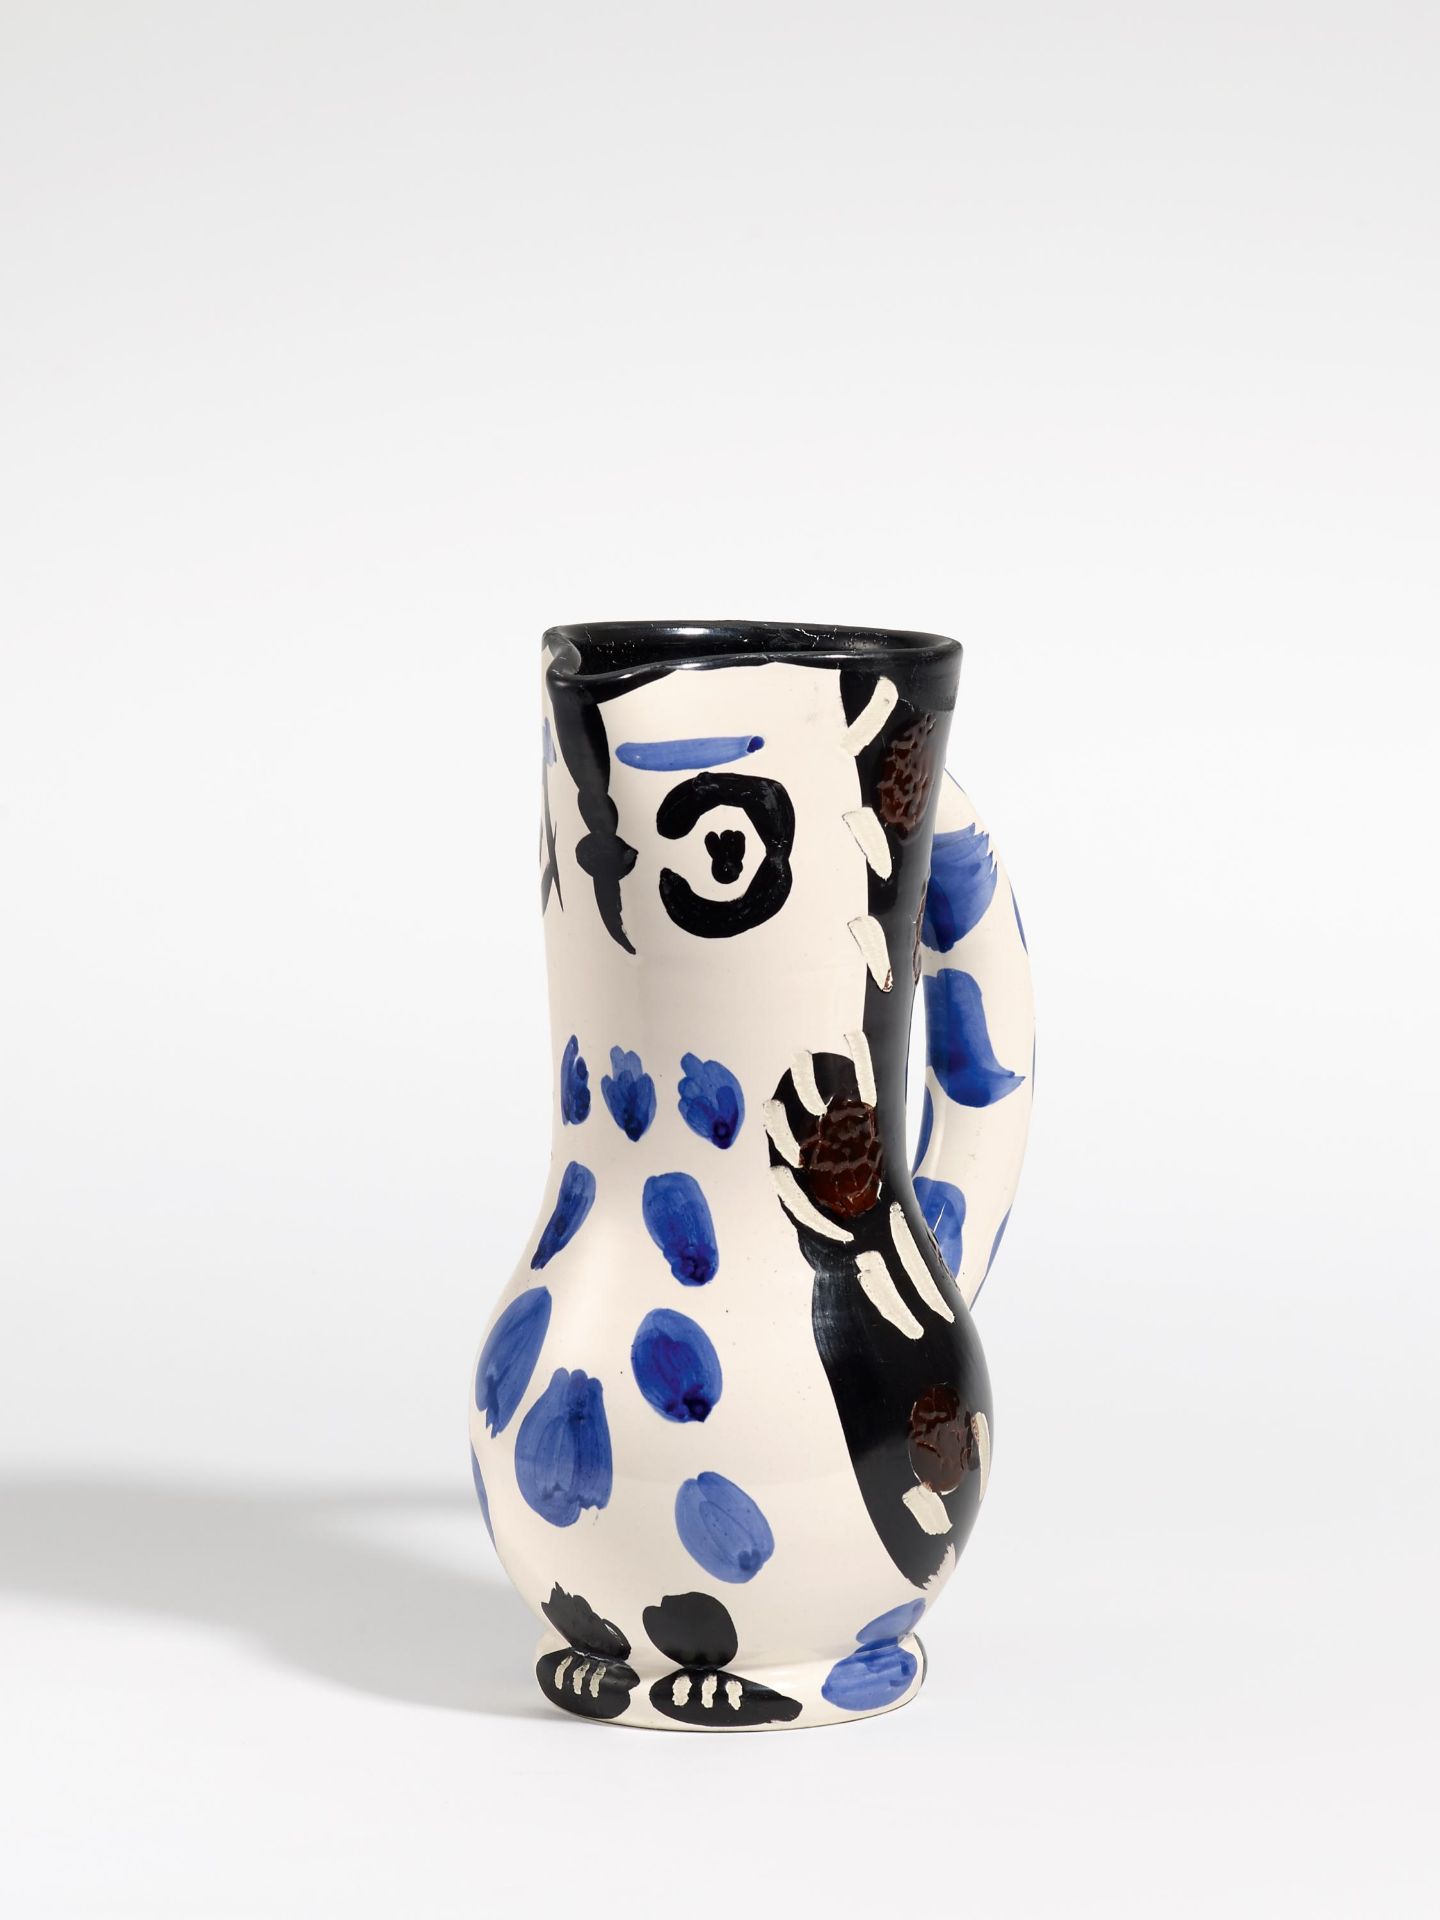 Picasso, Pablo 1881 Malaga - 1973 Mougins Small owl jug. 1953. Weißes Steingut, partiell farbig